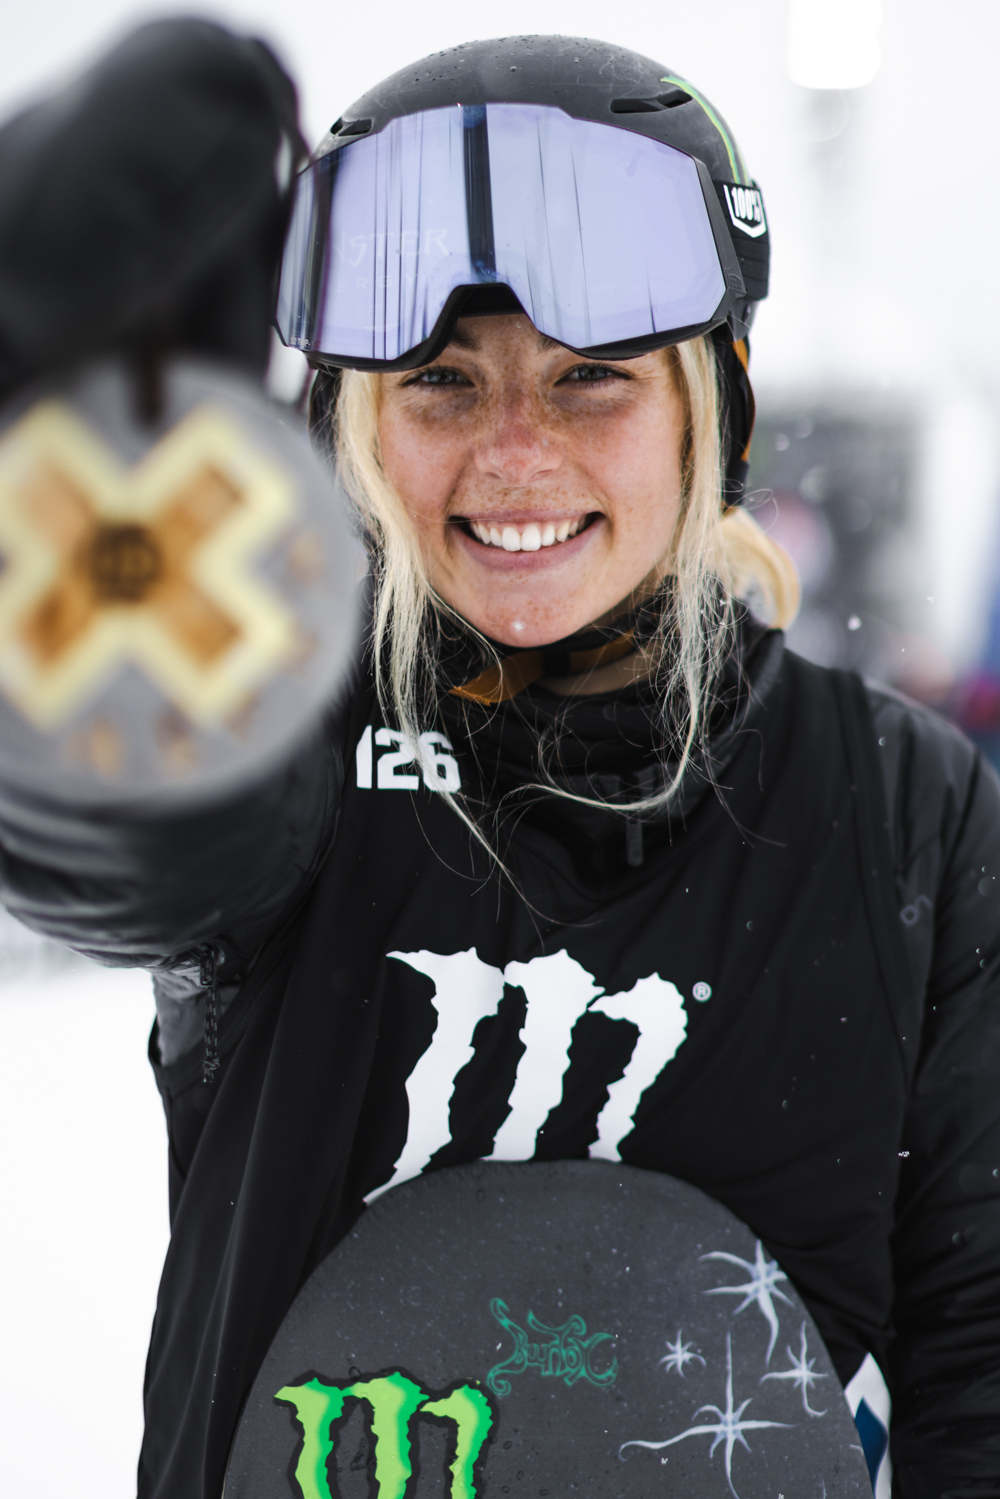 Monster Energy's Zoi Sadowski-Synnott Wins Gold in Women's Snowboard Slopestyle and Women's Snowboard Big Air at X Games Aspen 2022